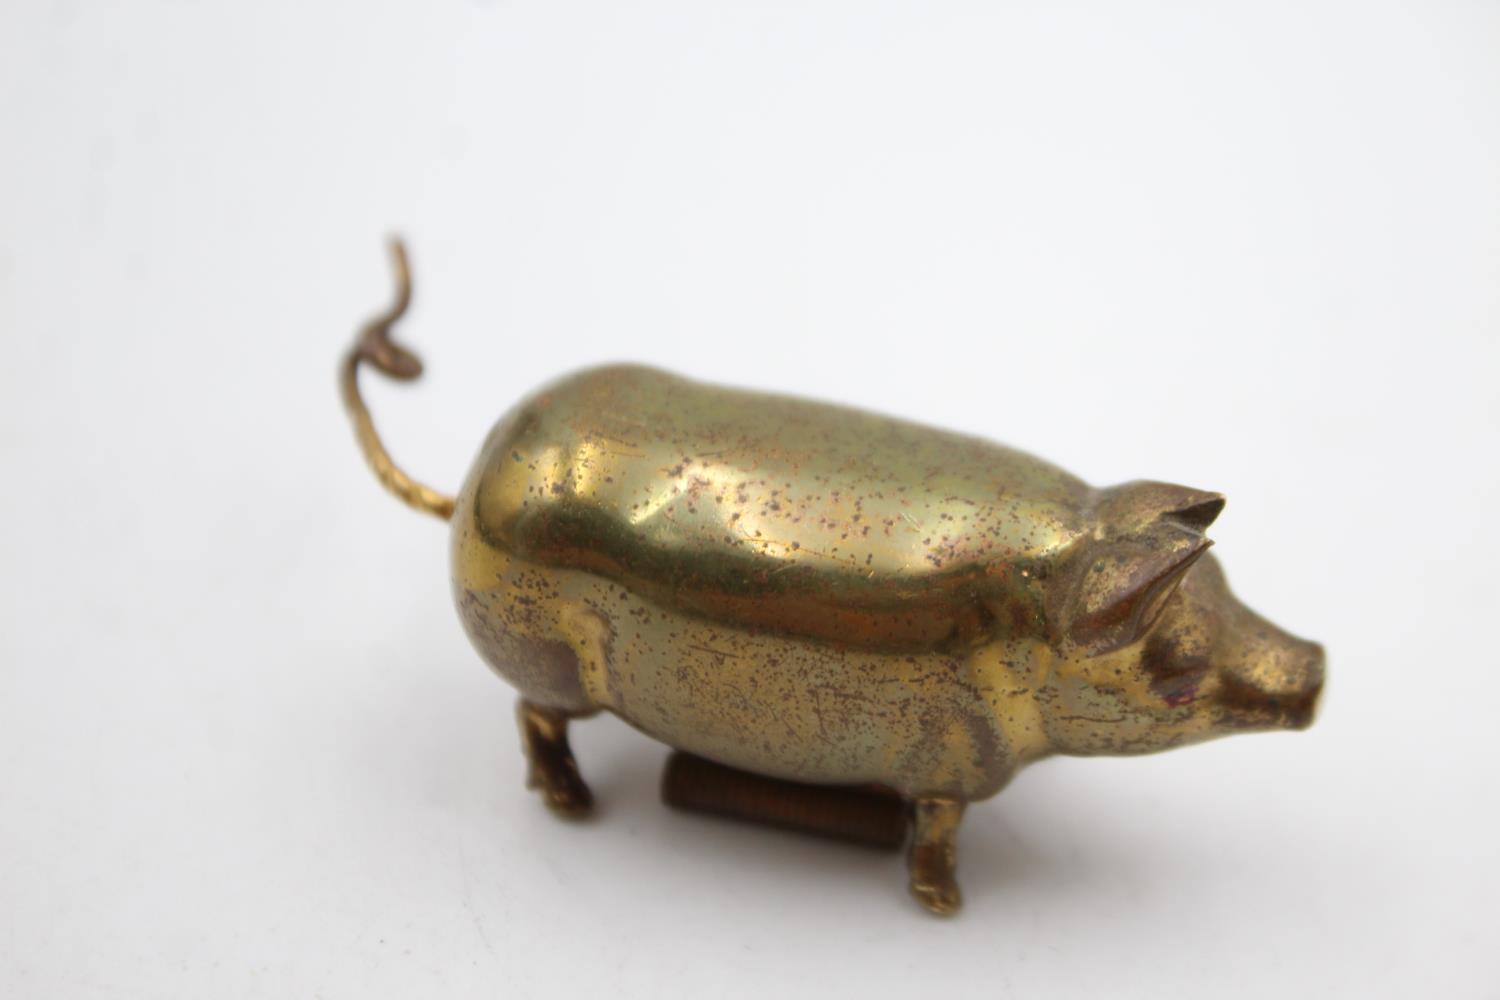 Antique / Vintage HABERDASHERY Novelty Tape Measure Pig Design w/ Rotating Tail Length - 6cm In